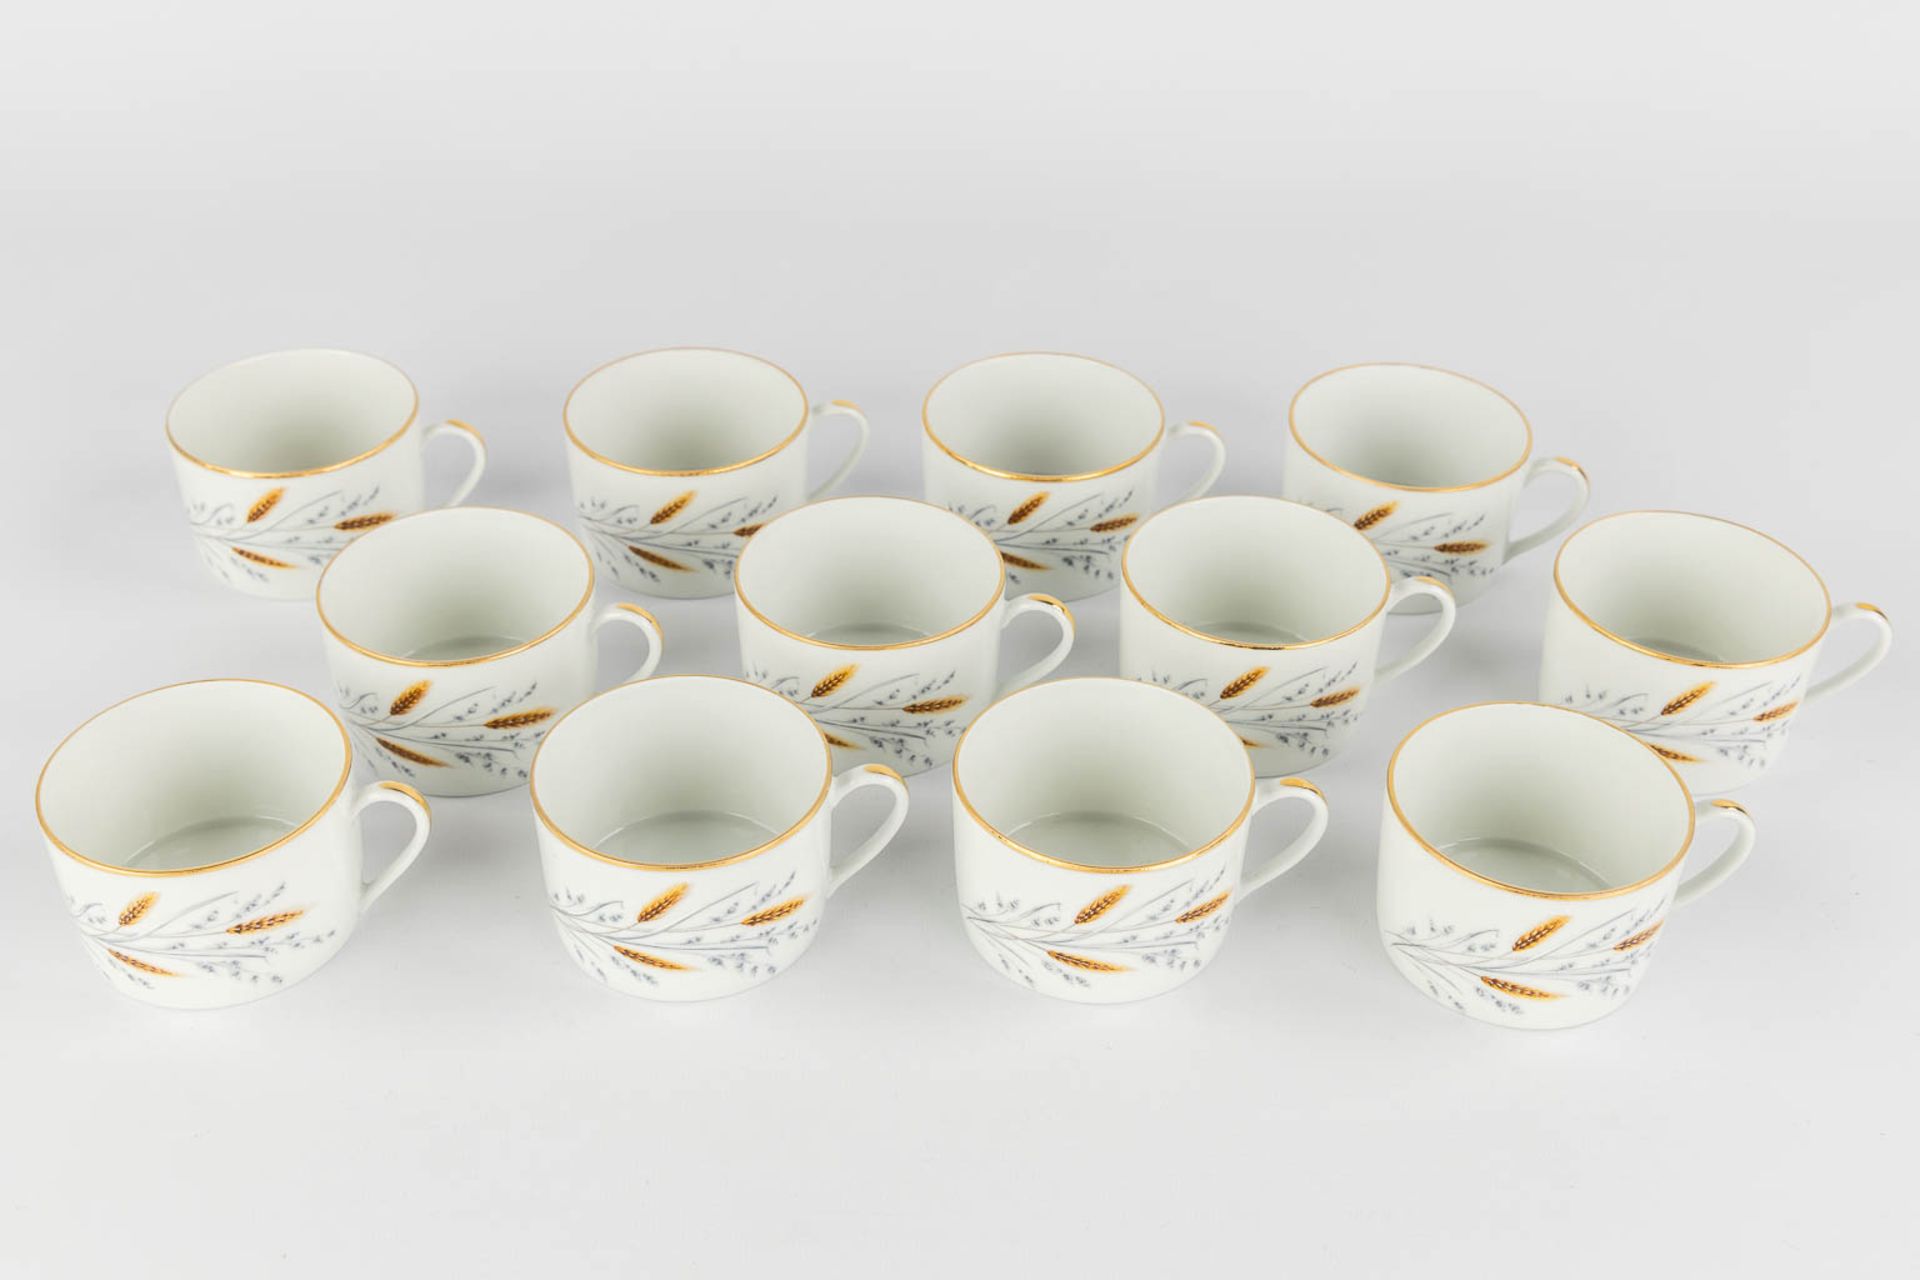 Limoges, France, a large, 12-person dinner, wild and coffee service. (L:23 x W:34 x H:22 cm) - Image 9 of 28